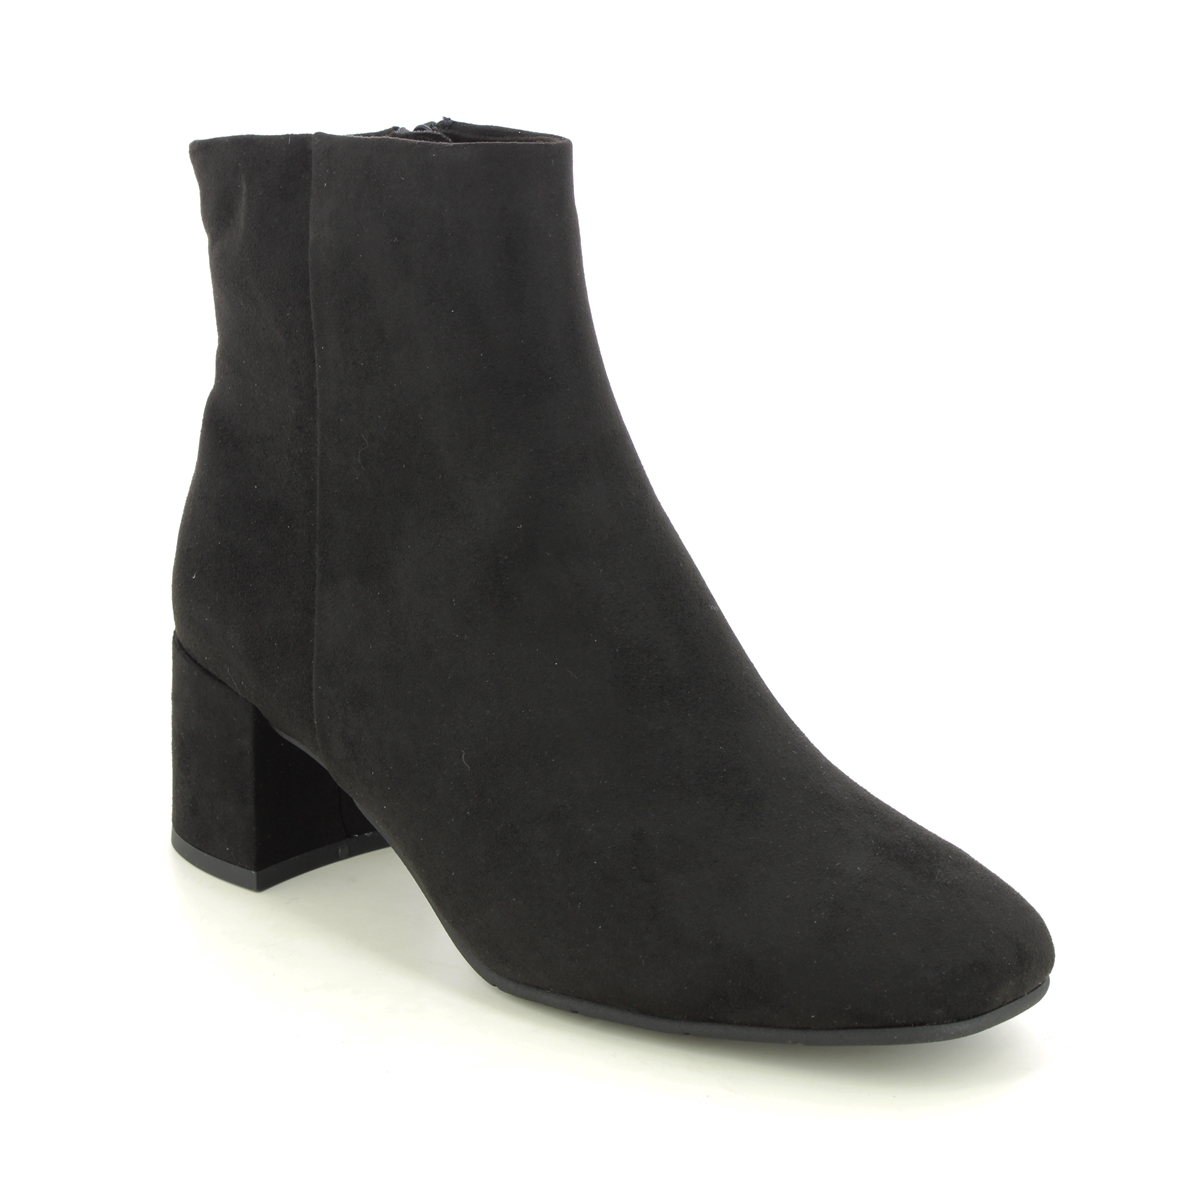 Marco Tozzi Vacco Black Womens Heeled Boots 25349-41-001 In Size 36 In Plain Black